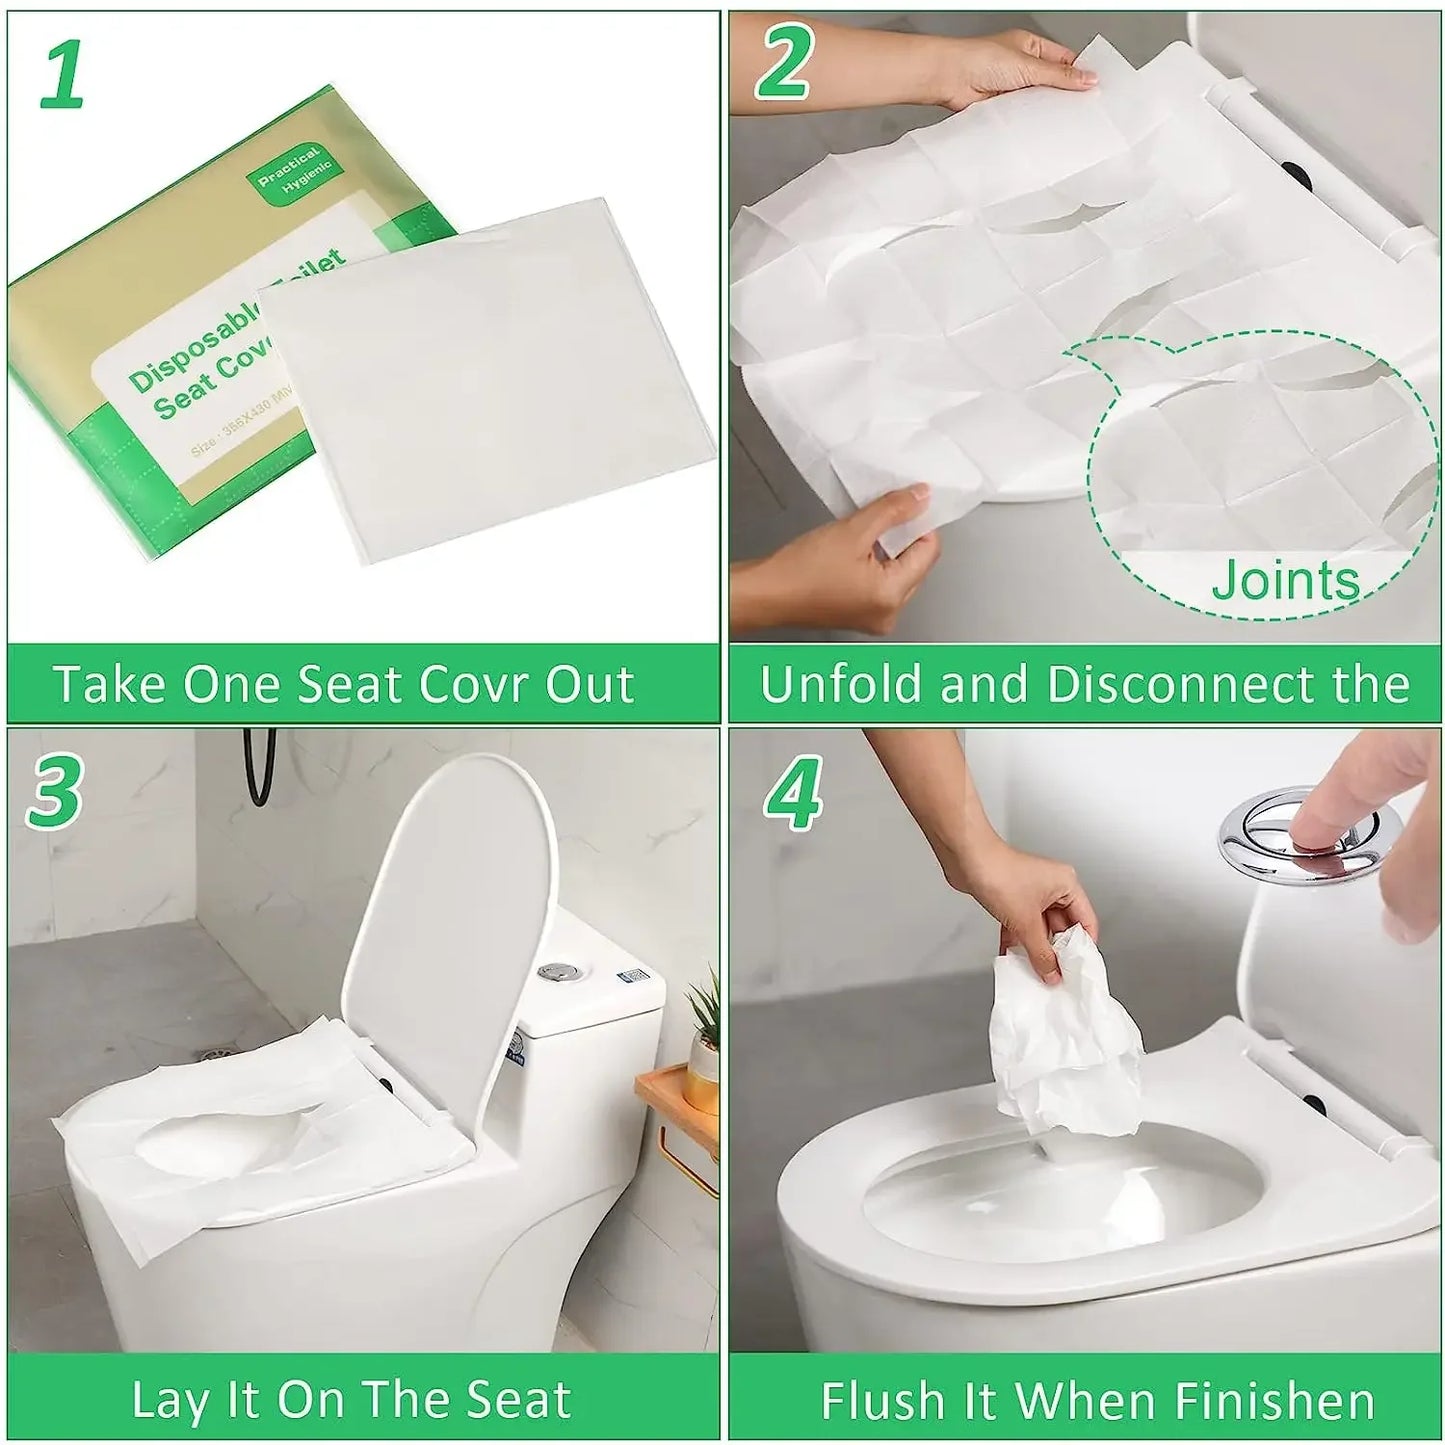 10/30/50PCS Disposable Toilet Seat Cover Portable Travel Camping Hotel Bathroom Degradable Waterproof Toilet Mat Accessories